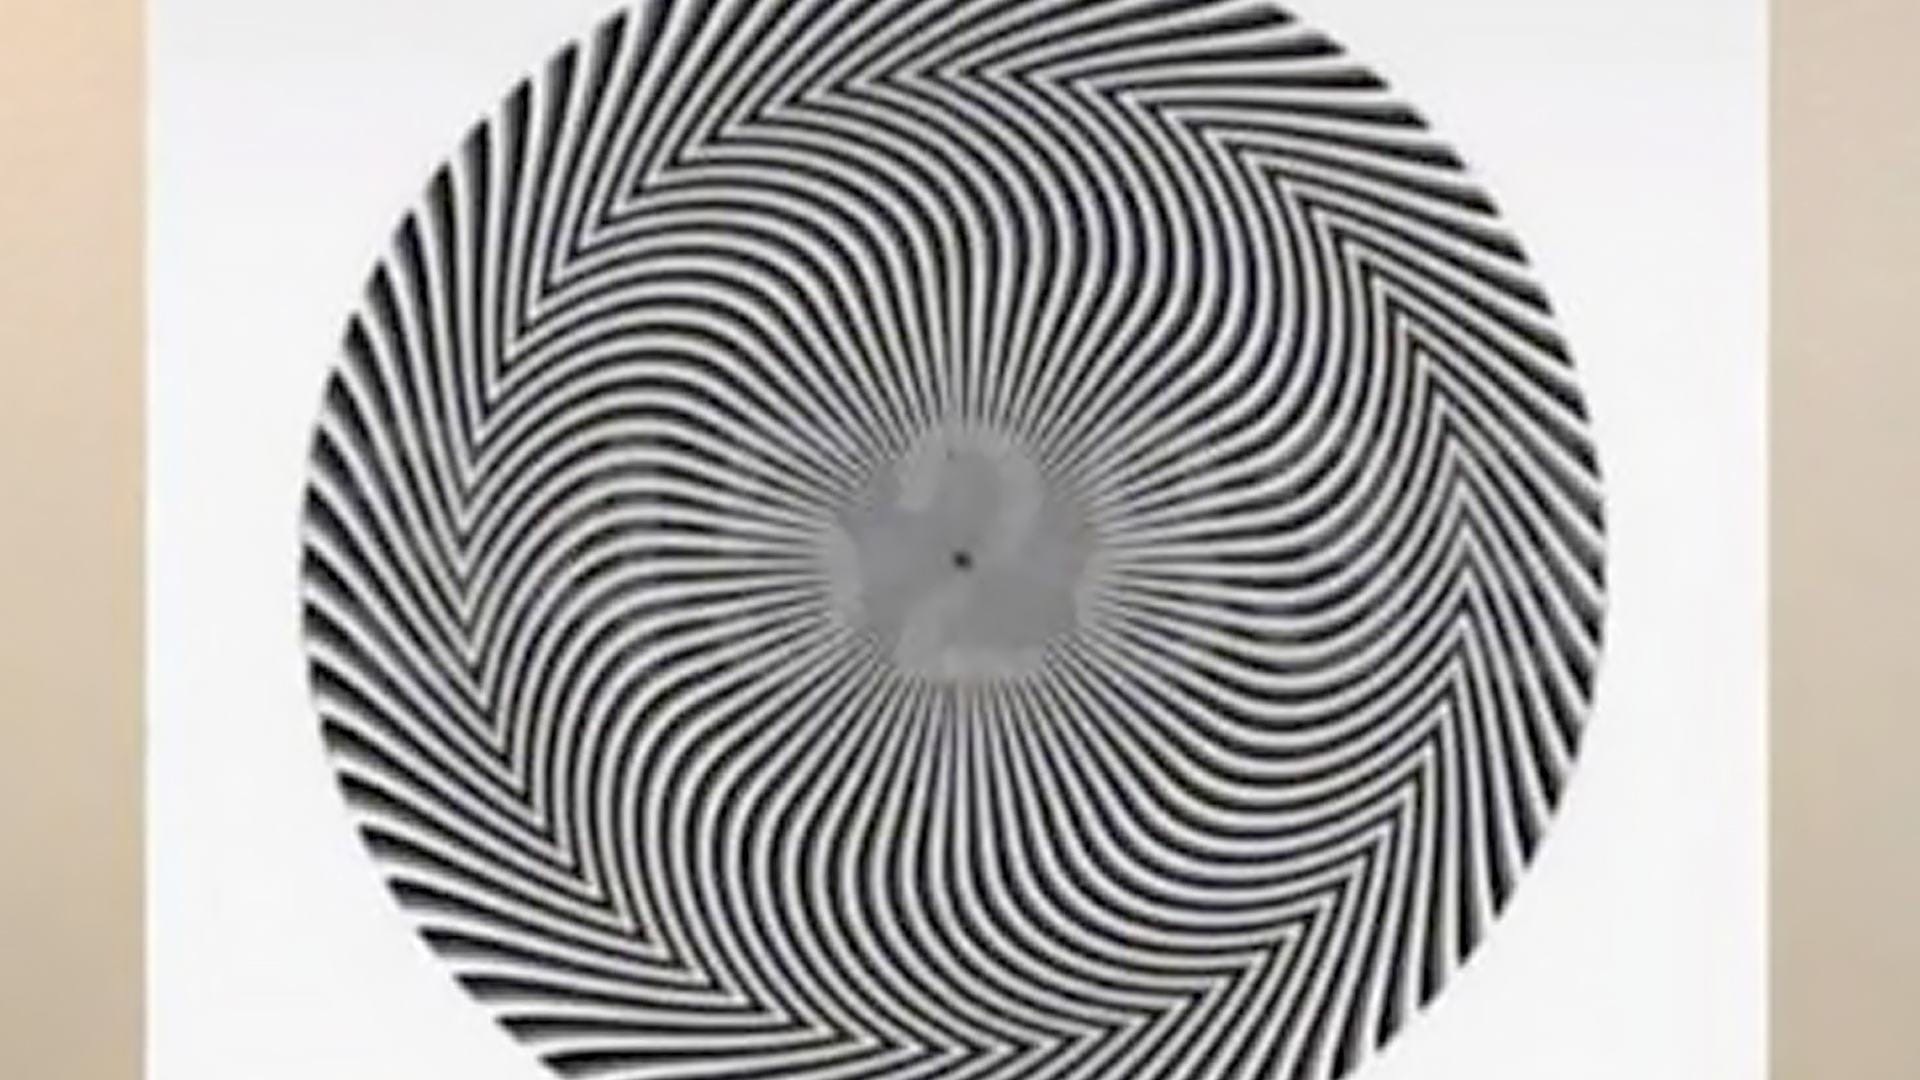 Most people spot different numbers in new optical illusion, what do you see first?